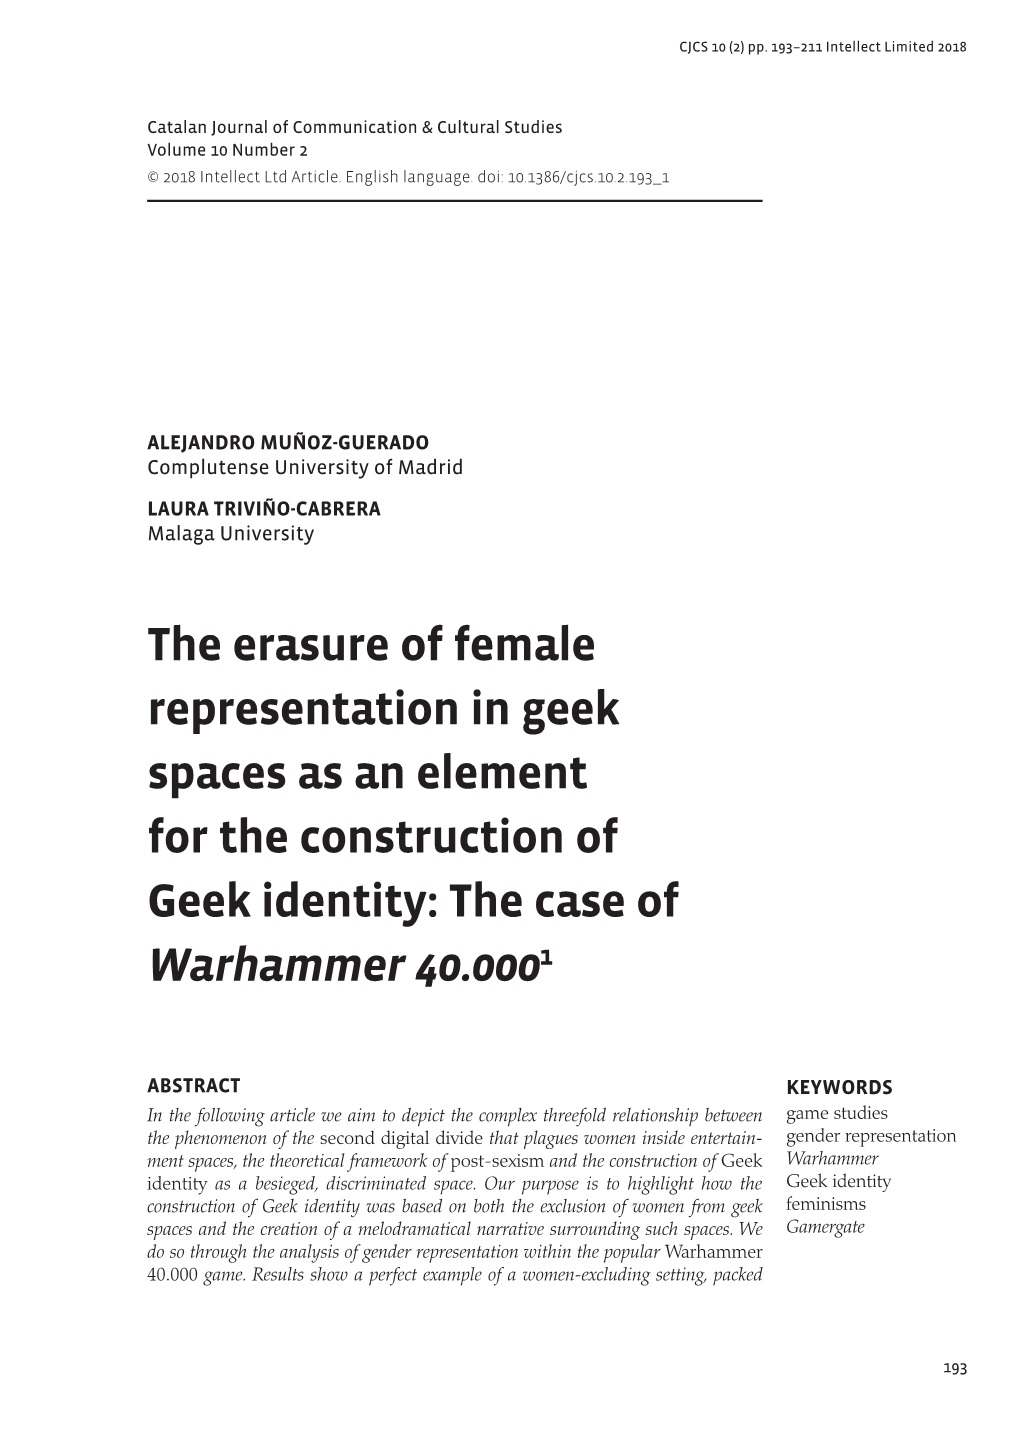 The Erasure of Female Representation in Geek Spaces As an Element for the Construction of Geek Identity: the Case of Warhammer 40.0001